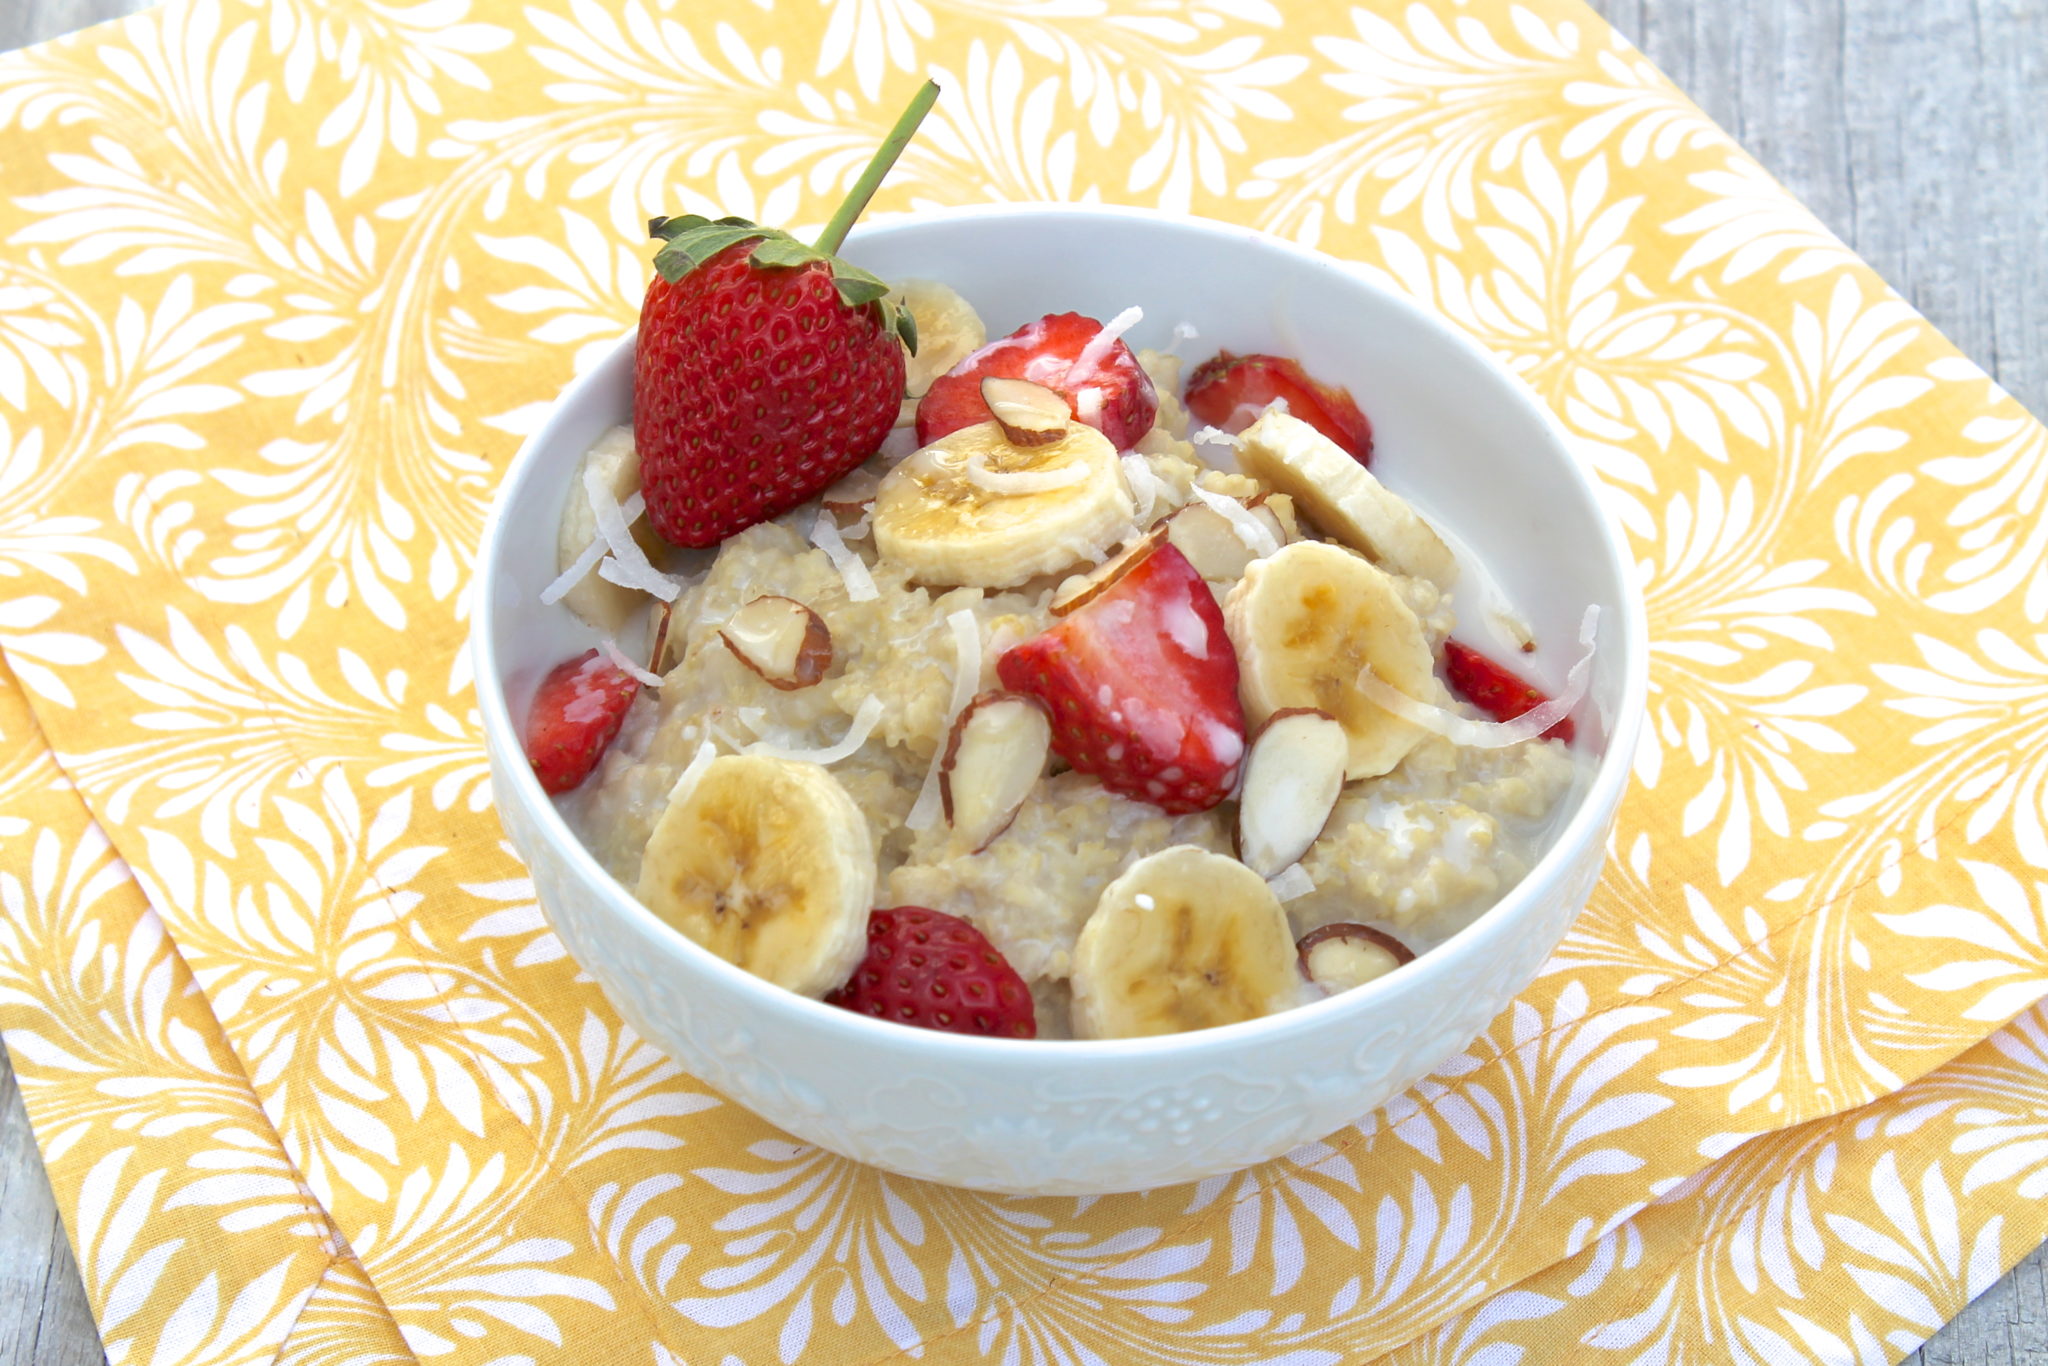 Add flavour to your porridge with fruit. Photo/Net